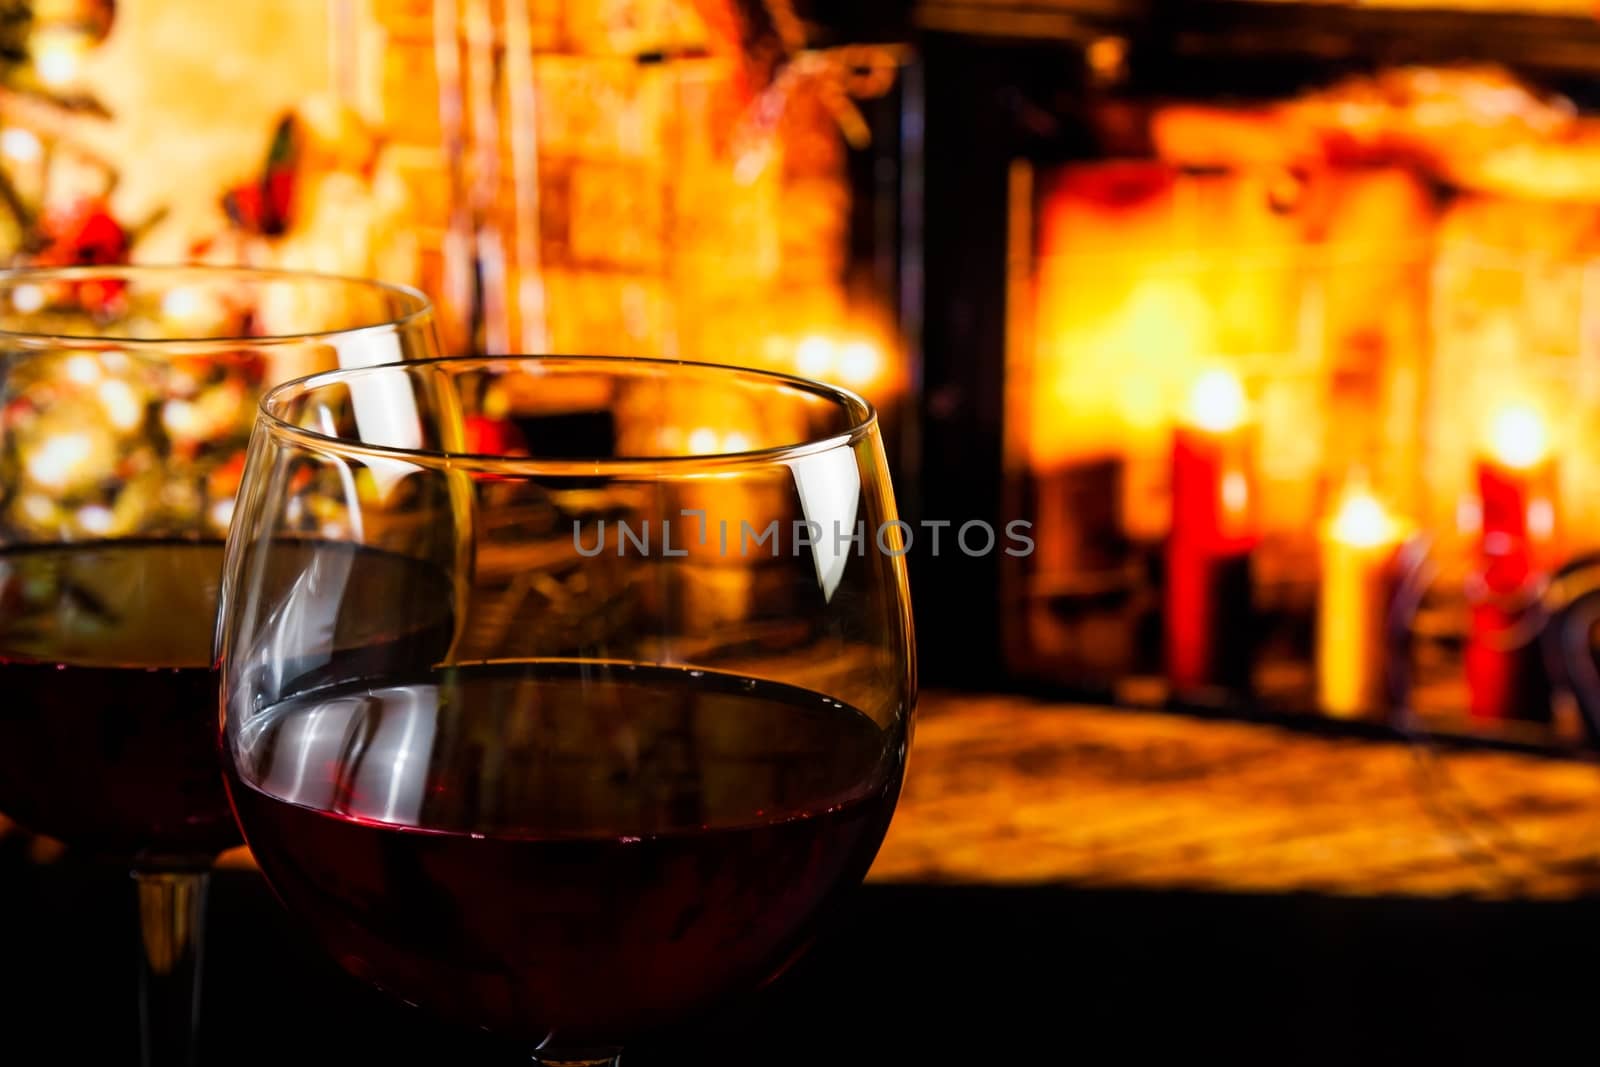 red wine glass against christmas lights decoration background, christmas atmosphere